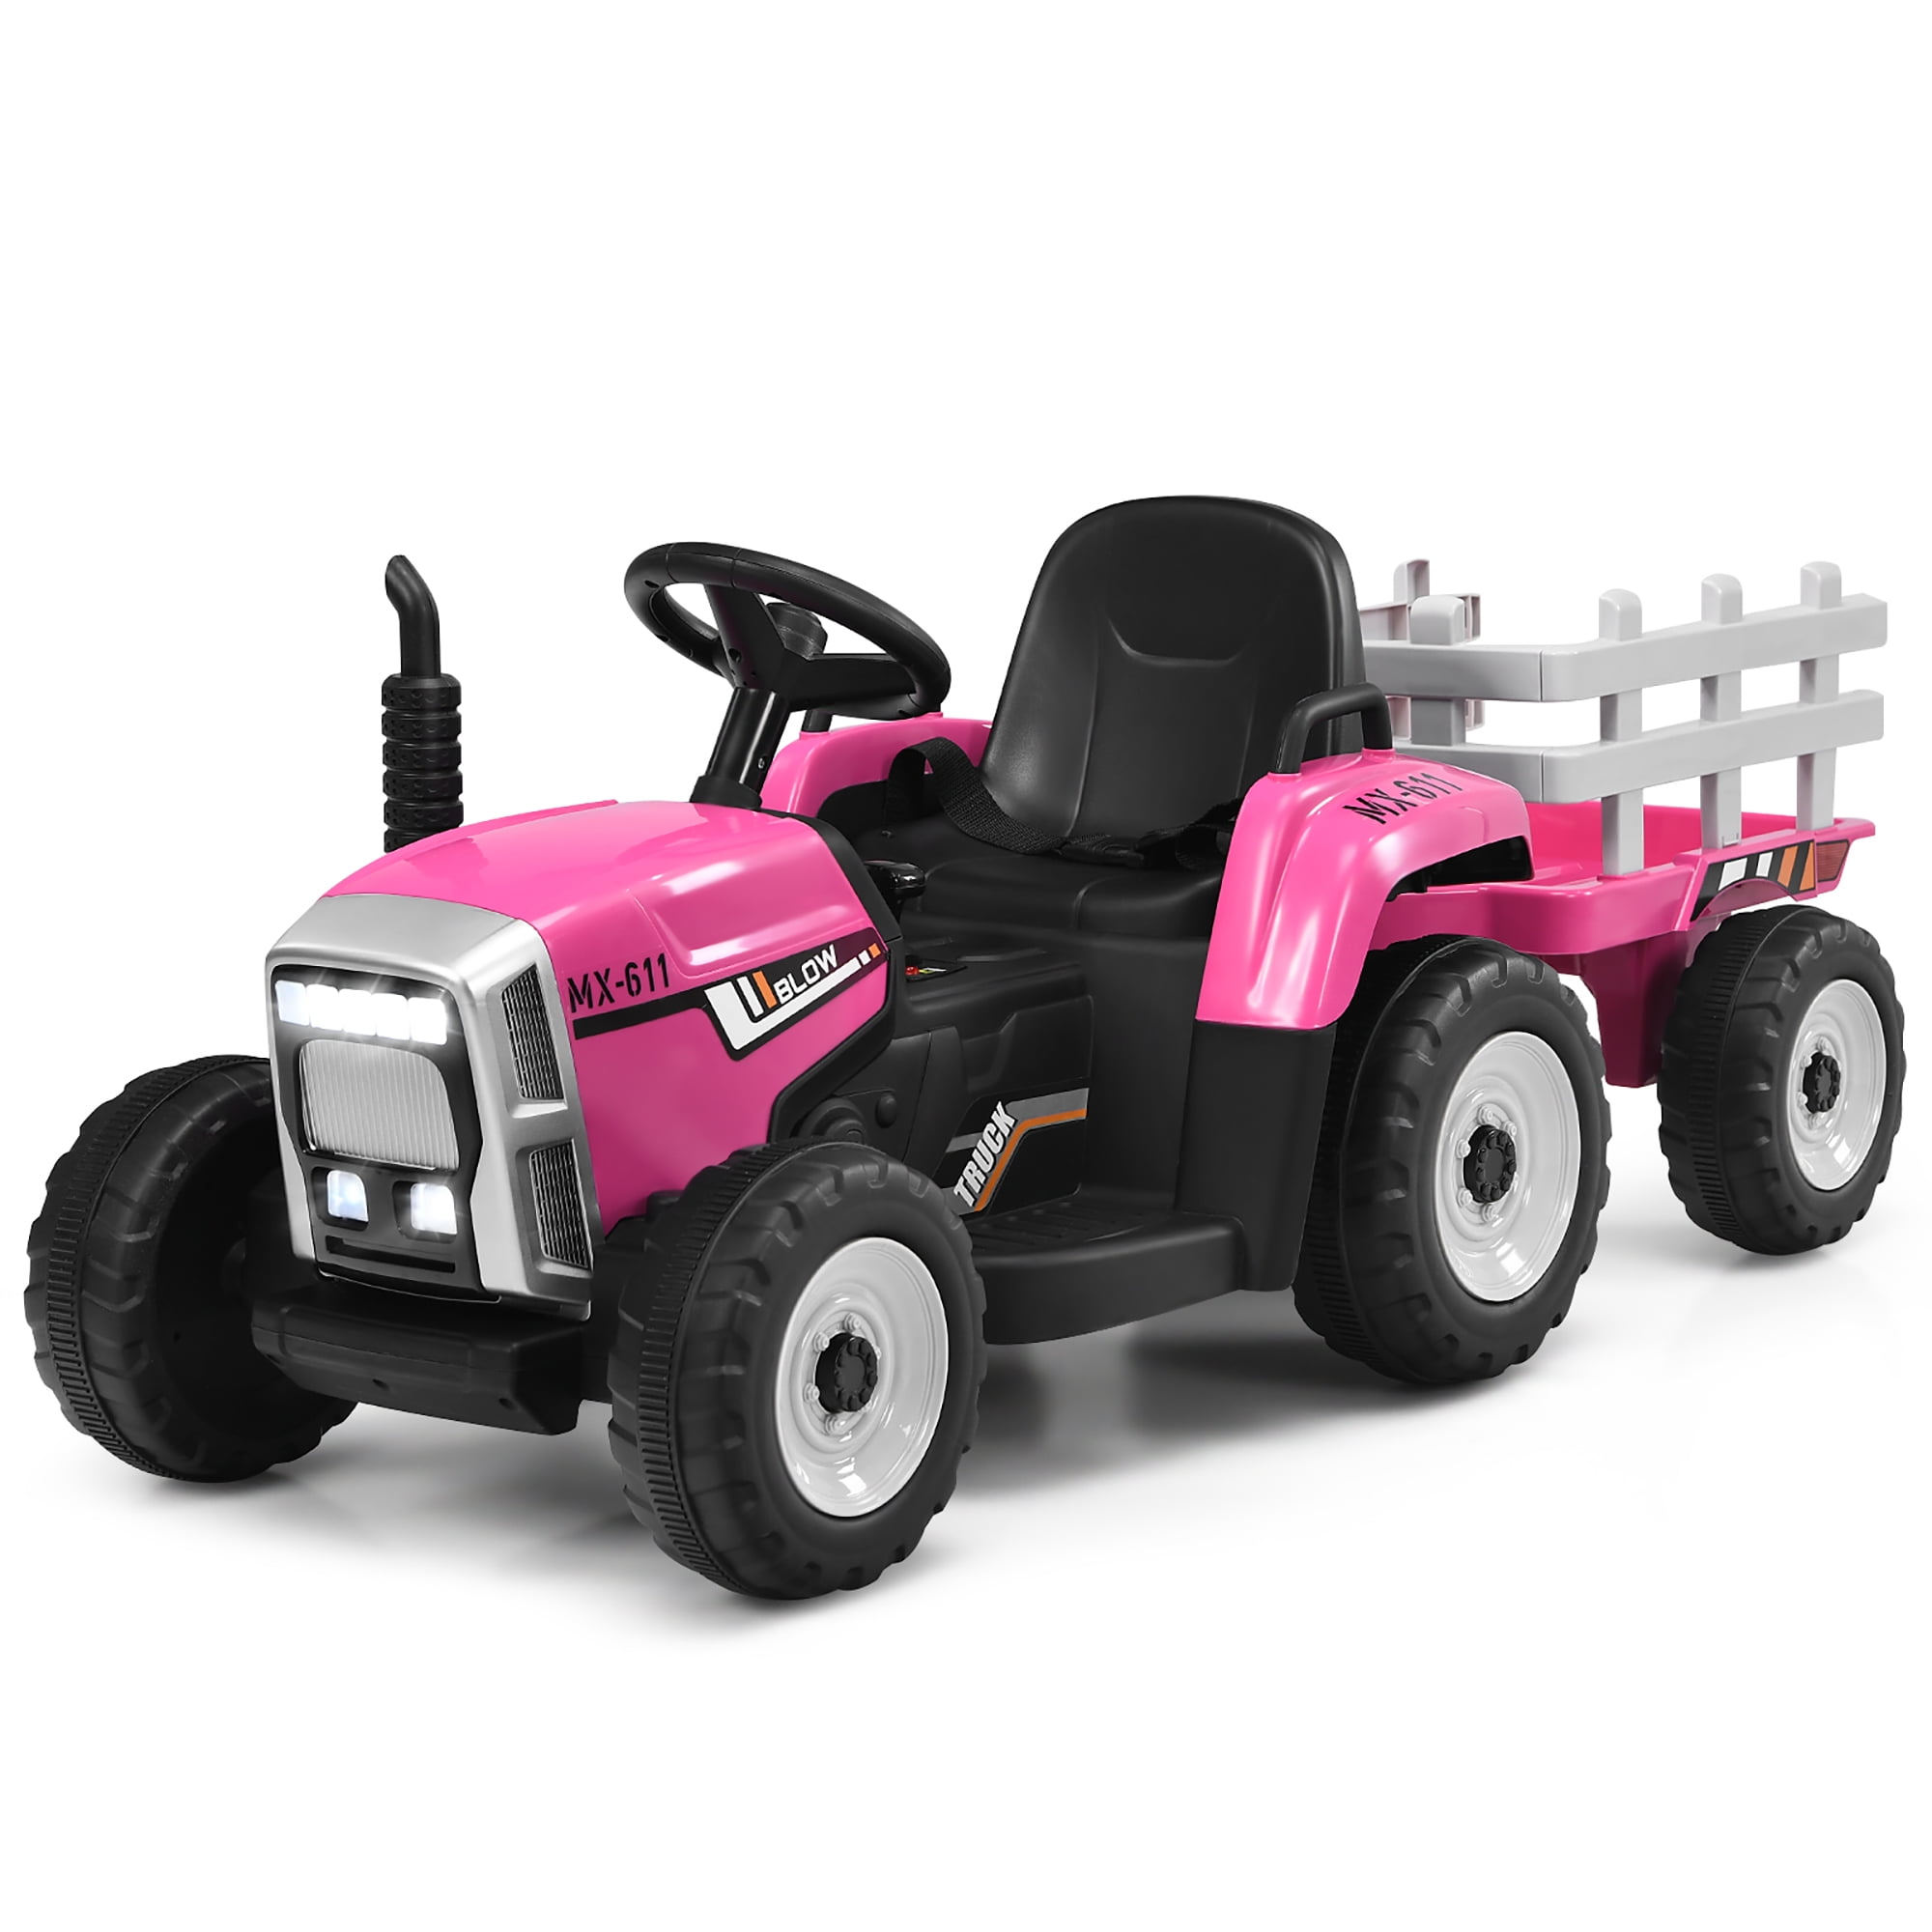 Costway 12v Battery Powered Kids Ride on Excavator Truck With Front Loader for sale online 